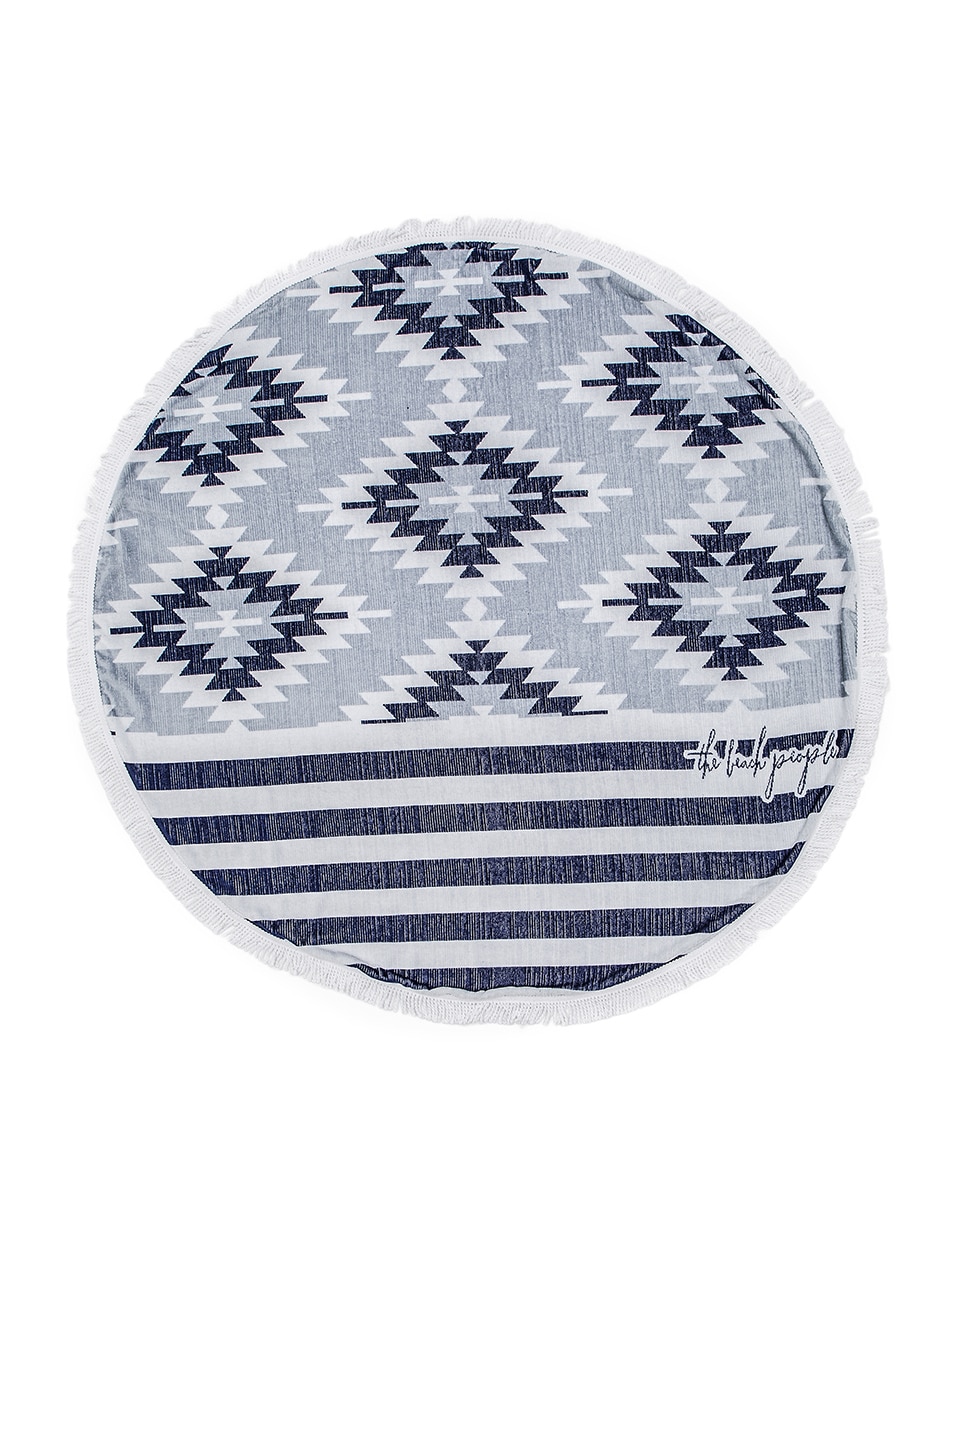 Image 1 of The Beach People Montauk Towel in White